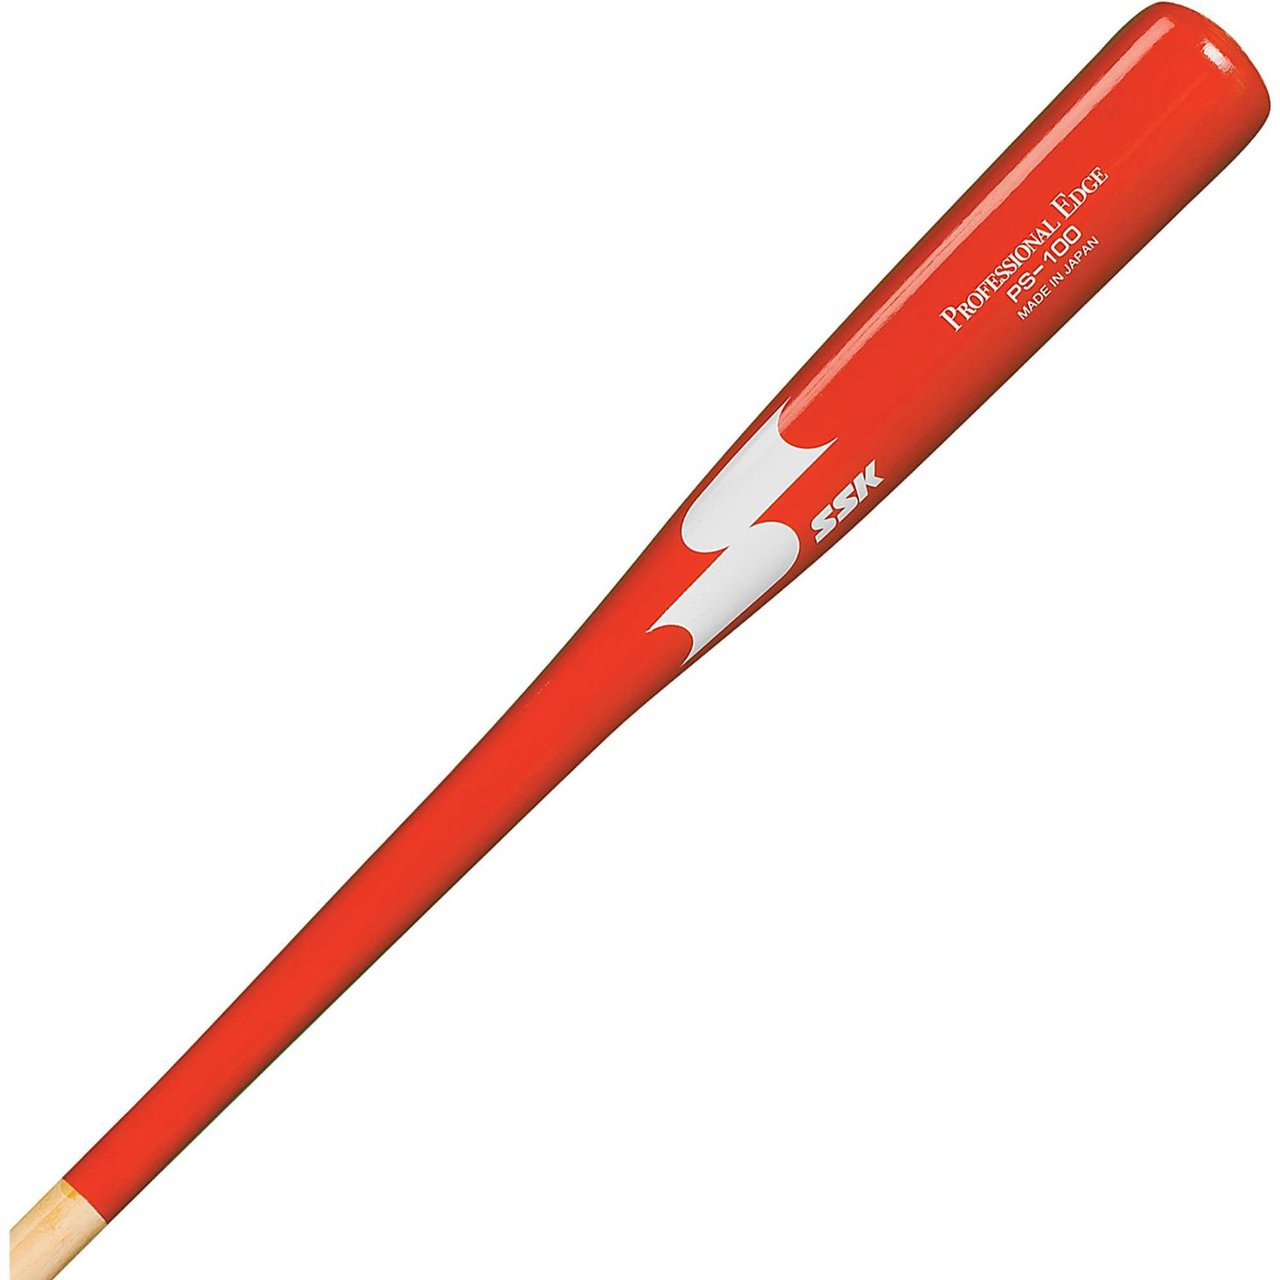 ssk-ps200-wood-fungo-bat-natural-red-natural-red-37 PS-200RED SSK 083351448615 SSK 33 Wood Fungo Bat The most sought after wood Fungo